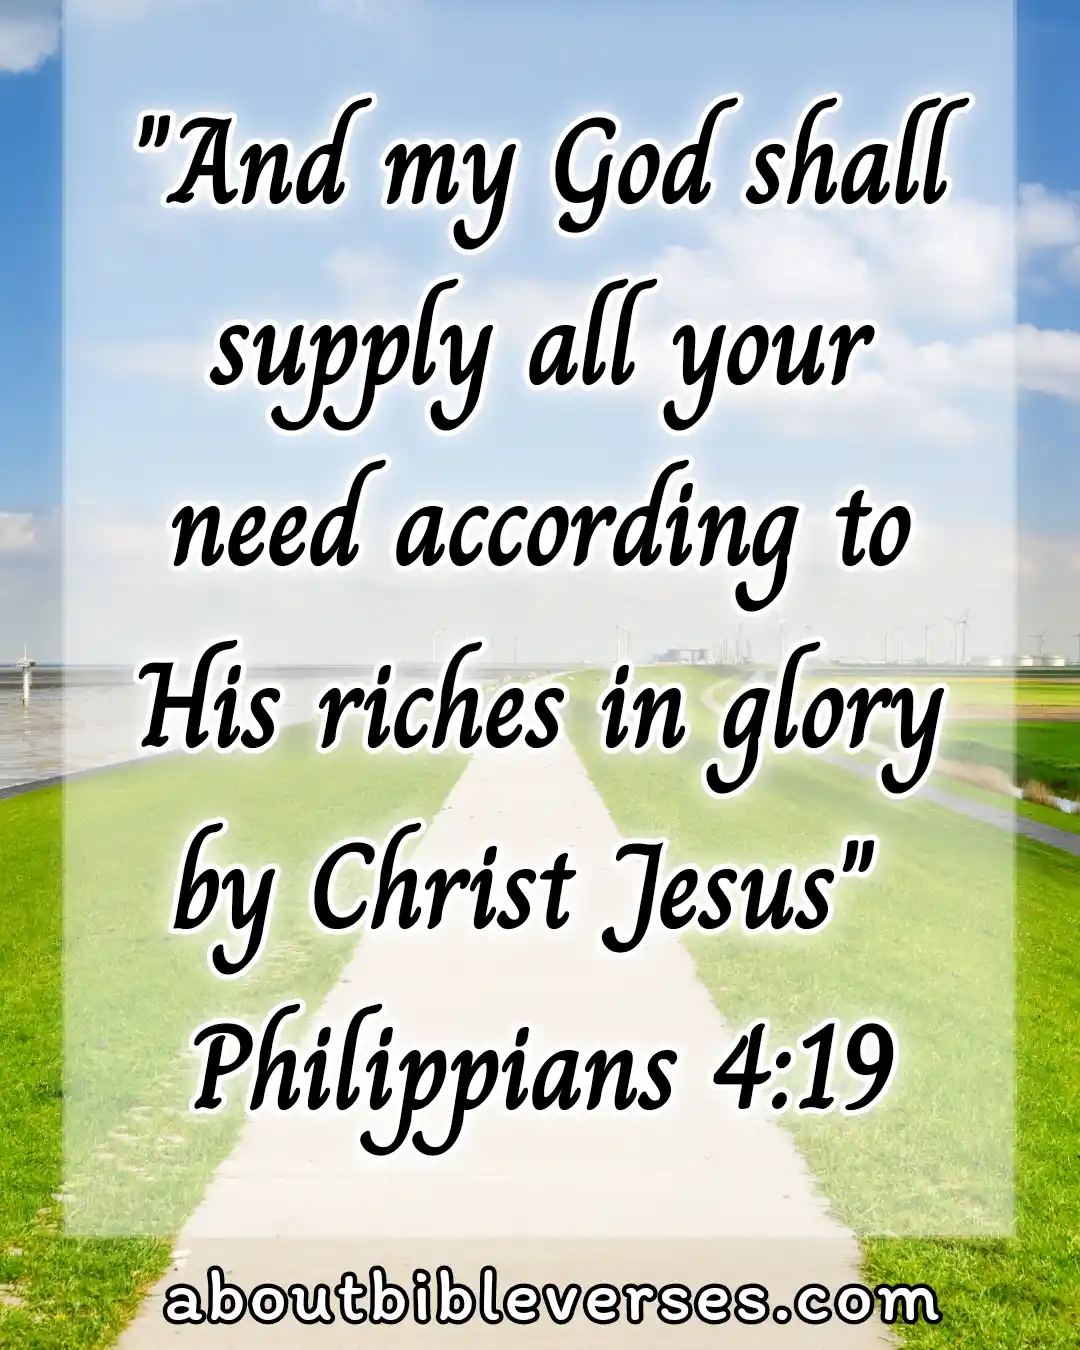 Holy Saturday Morning Blessing Bible Verses(Philippians 4:19)